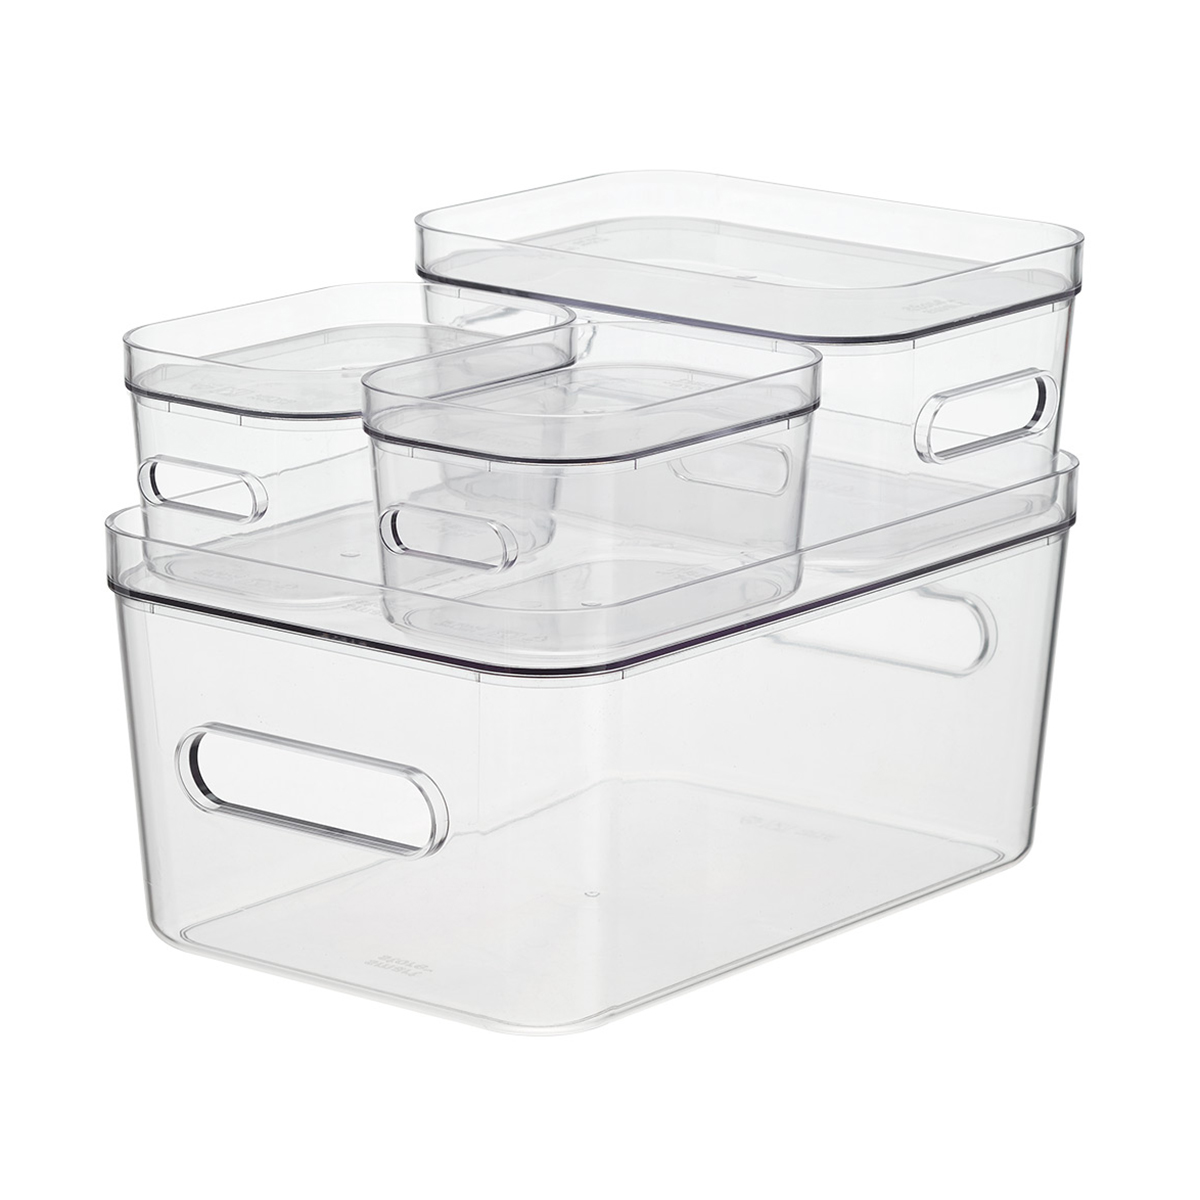 Smart Store Clear Compact Plastic Bins 4-Pack with Clear Lids